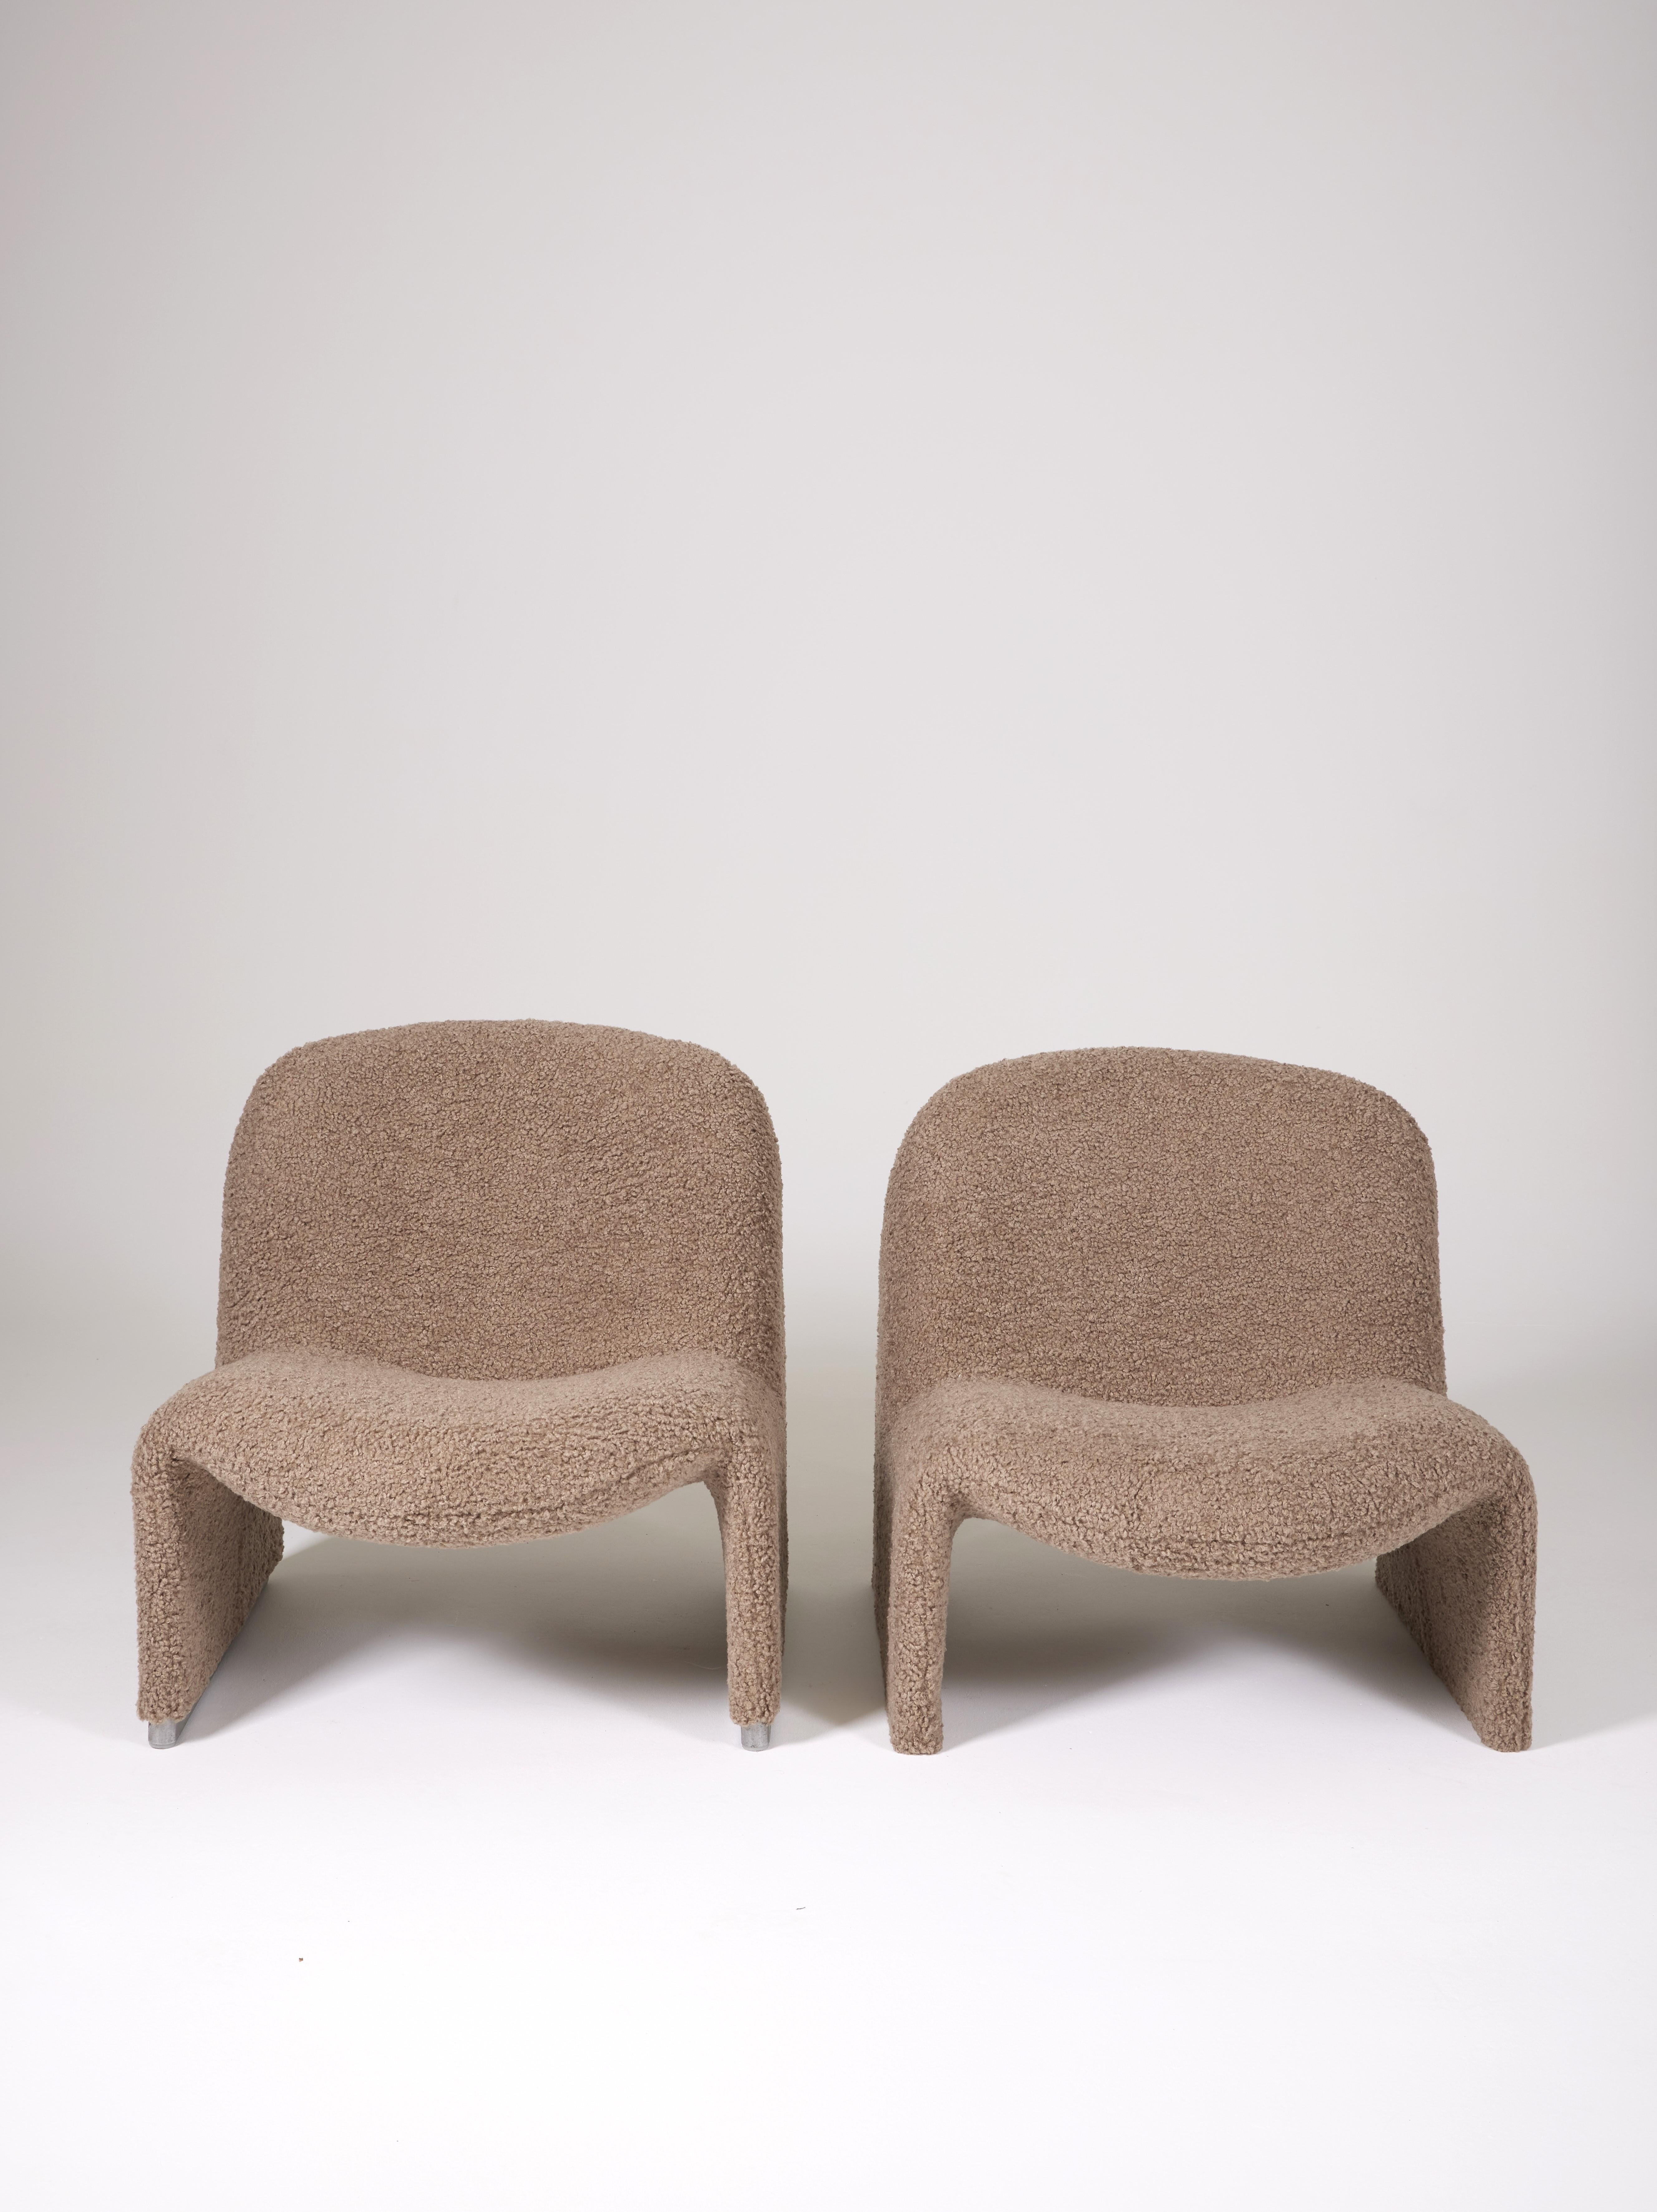 Pair of Alky armchairs by Giancarlo Piretti for Artifort, Italy 1970s. Completely reupholstered in high quality bouclette fabric. Tubular structure covered with foam and aluminum base. 
Excellent condition.